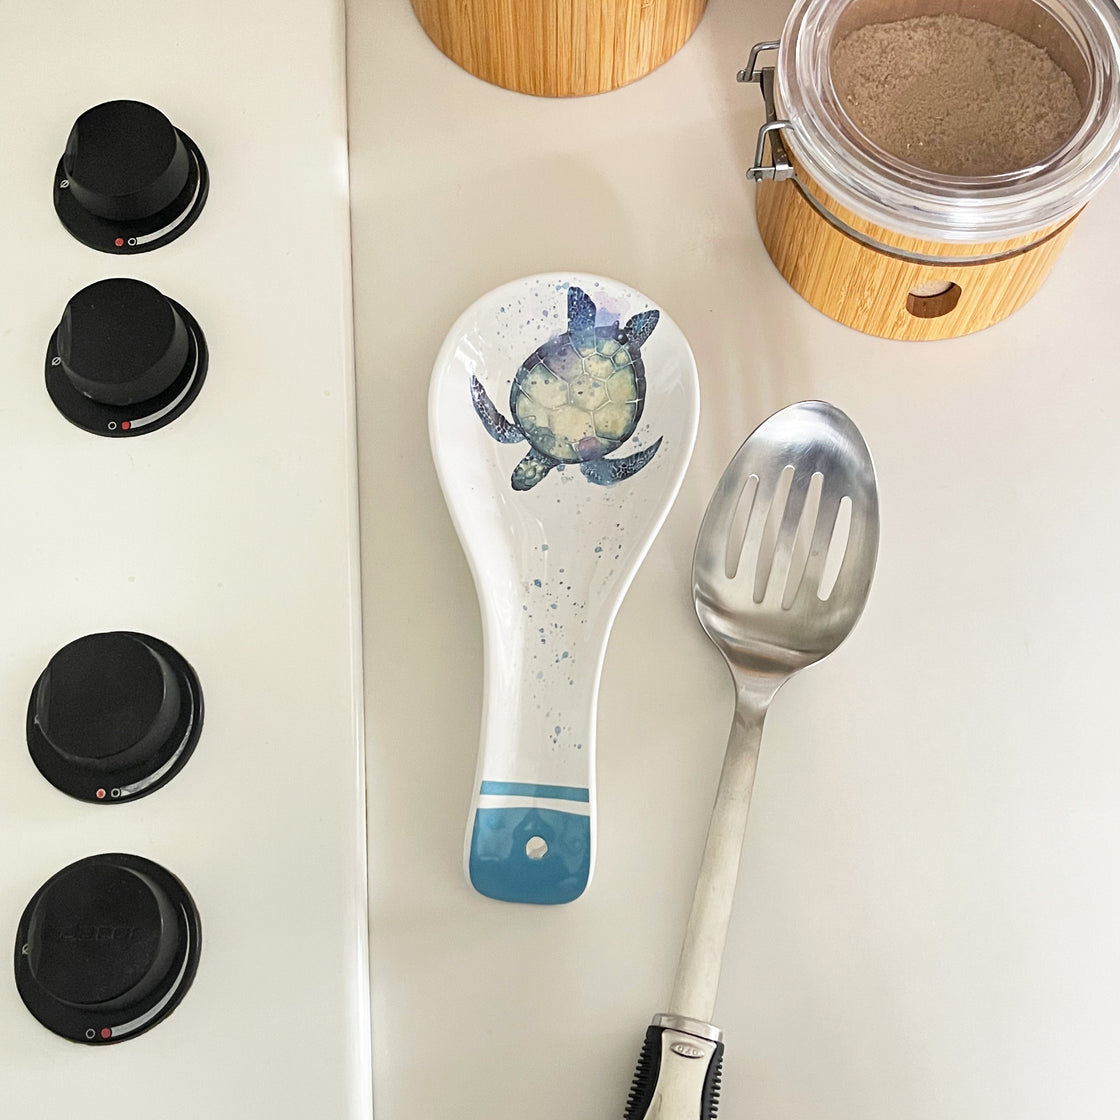 sea turtle spoon rest shown in kitchen with large stainless steel slotted spoon